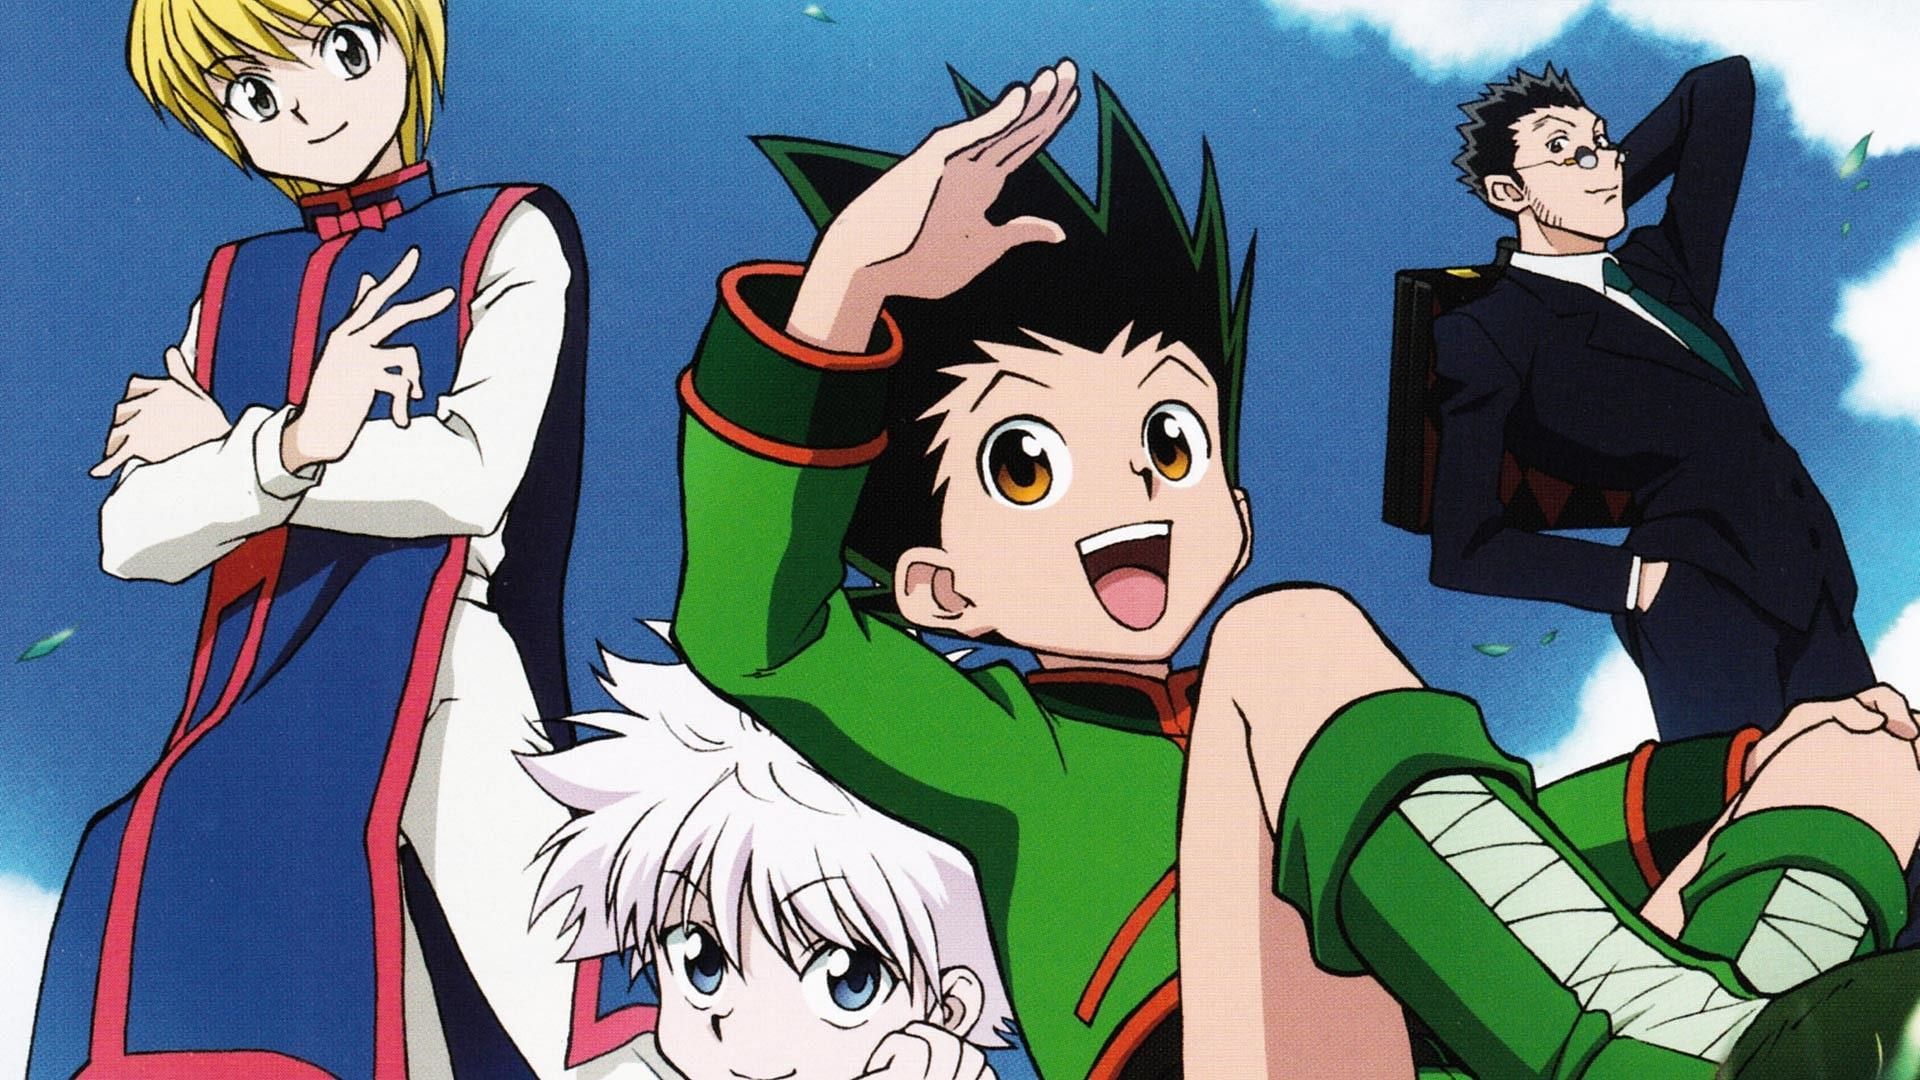 Hunter x Hunter chapter 391 release date, time and how to read